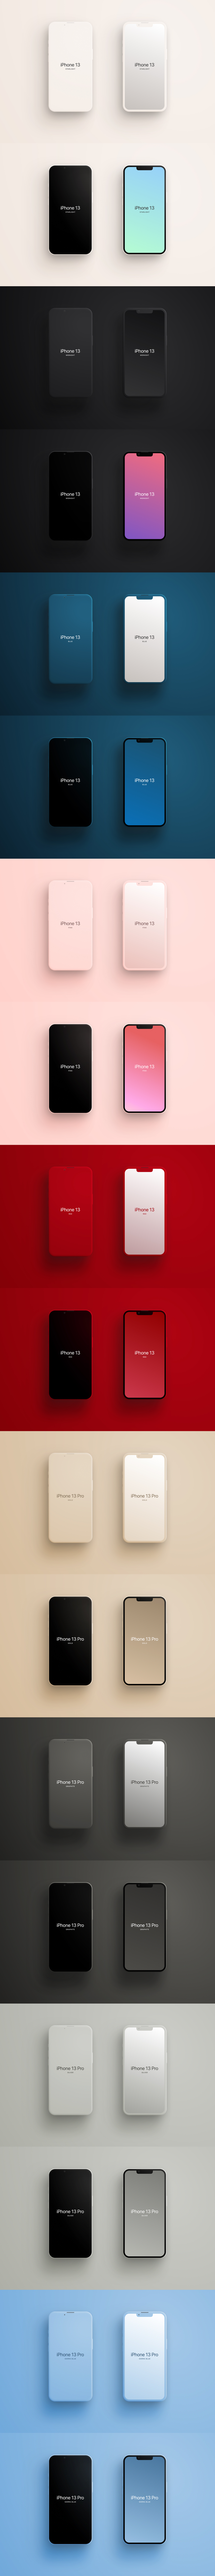 Matte iPhone Free Mockups for Figma - Created in Figma, for Figma users. These mockups were made from scratch in Figma to support components and variants. Just choose the iPhone model, then pick a color from a list of official color presets in the variants menu.